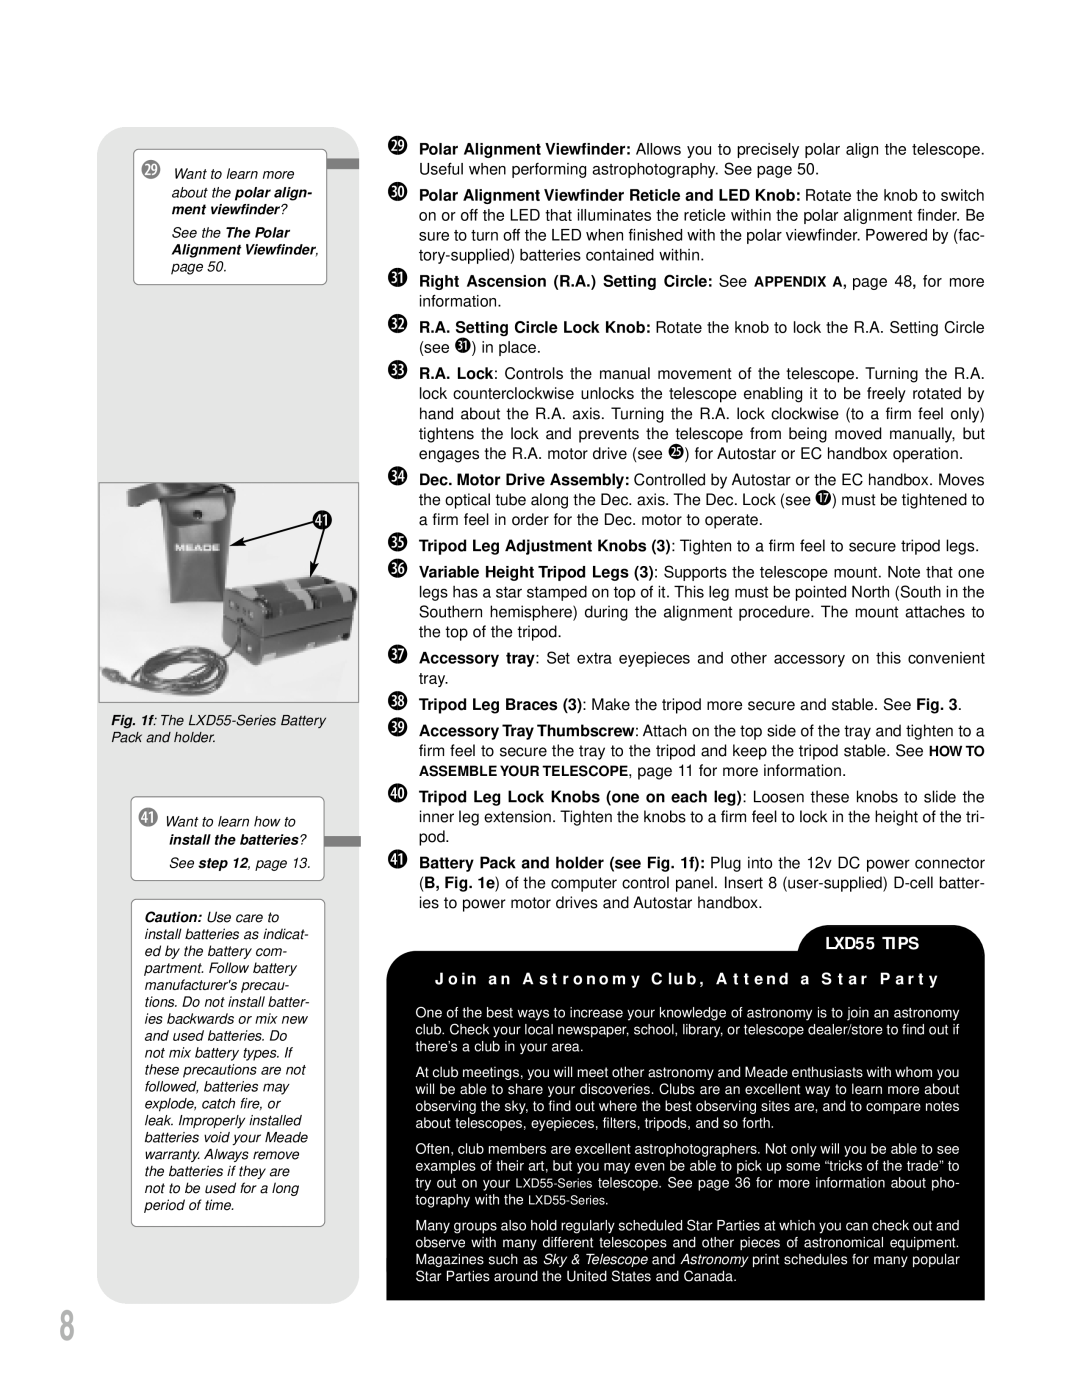 Meade instruction manual LXD55 TIPS, Join an Astronomy Club, Attend a Star Party 